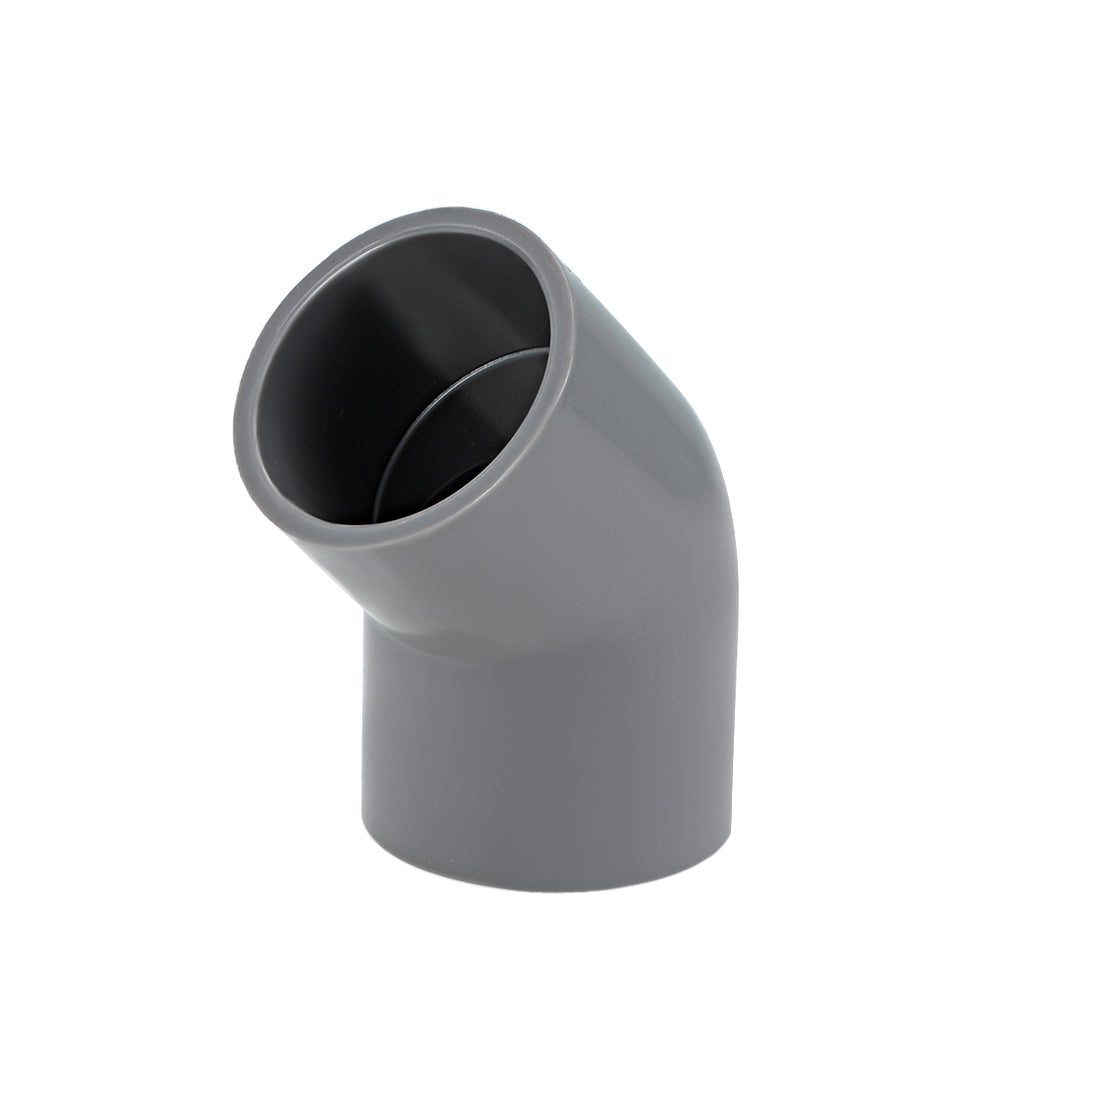 uxcell Uxcell PVC Pipe Fitting, 32mm Slip Socket, 45 Degree Elbow Connector Gray 10Pcs